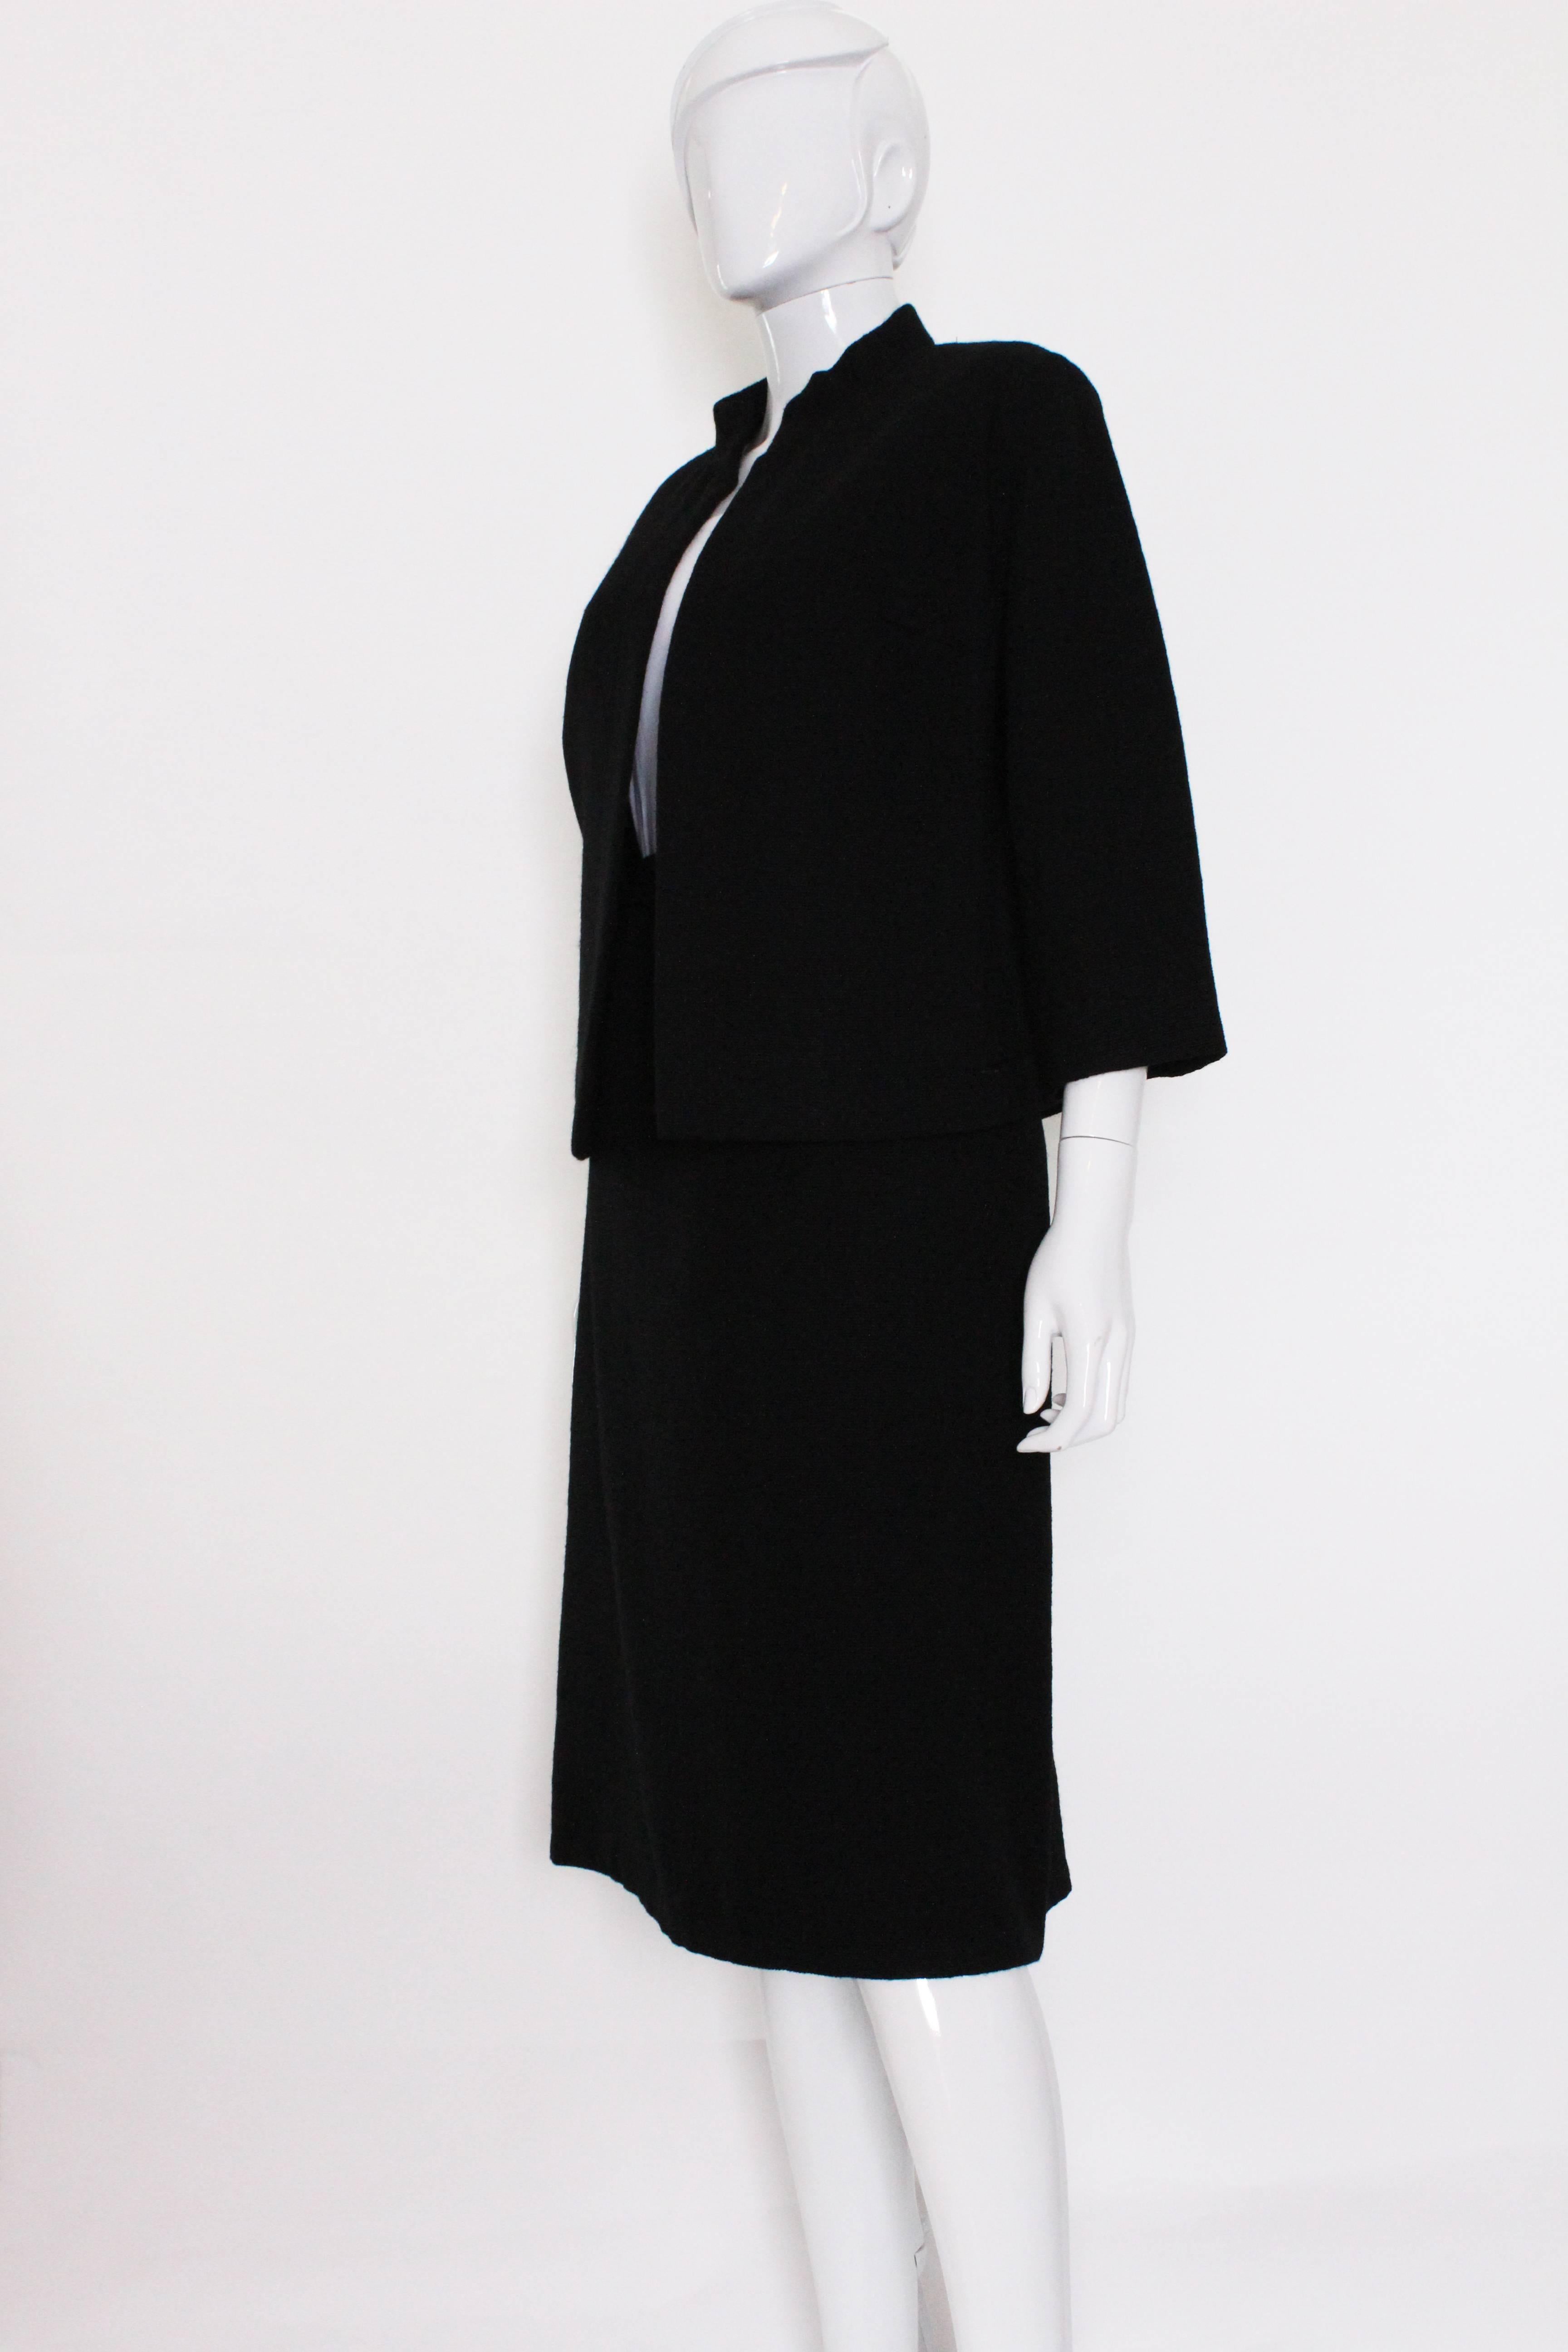 A charming and chic suit by Christian Dior. A numbered , 49839 , Dior, Christian Dior London Suit.The jacket has a mandarin collar and elbow length sleeves and no fastening.The skirt is A line, with a central back zip.
The jacket is bust up to